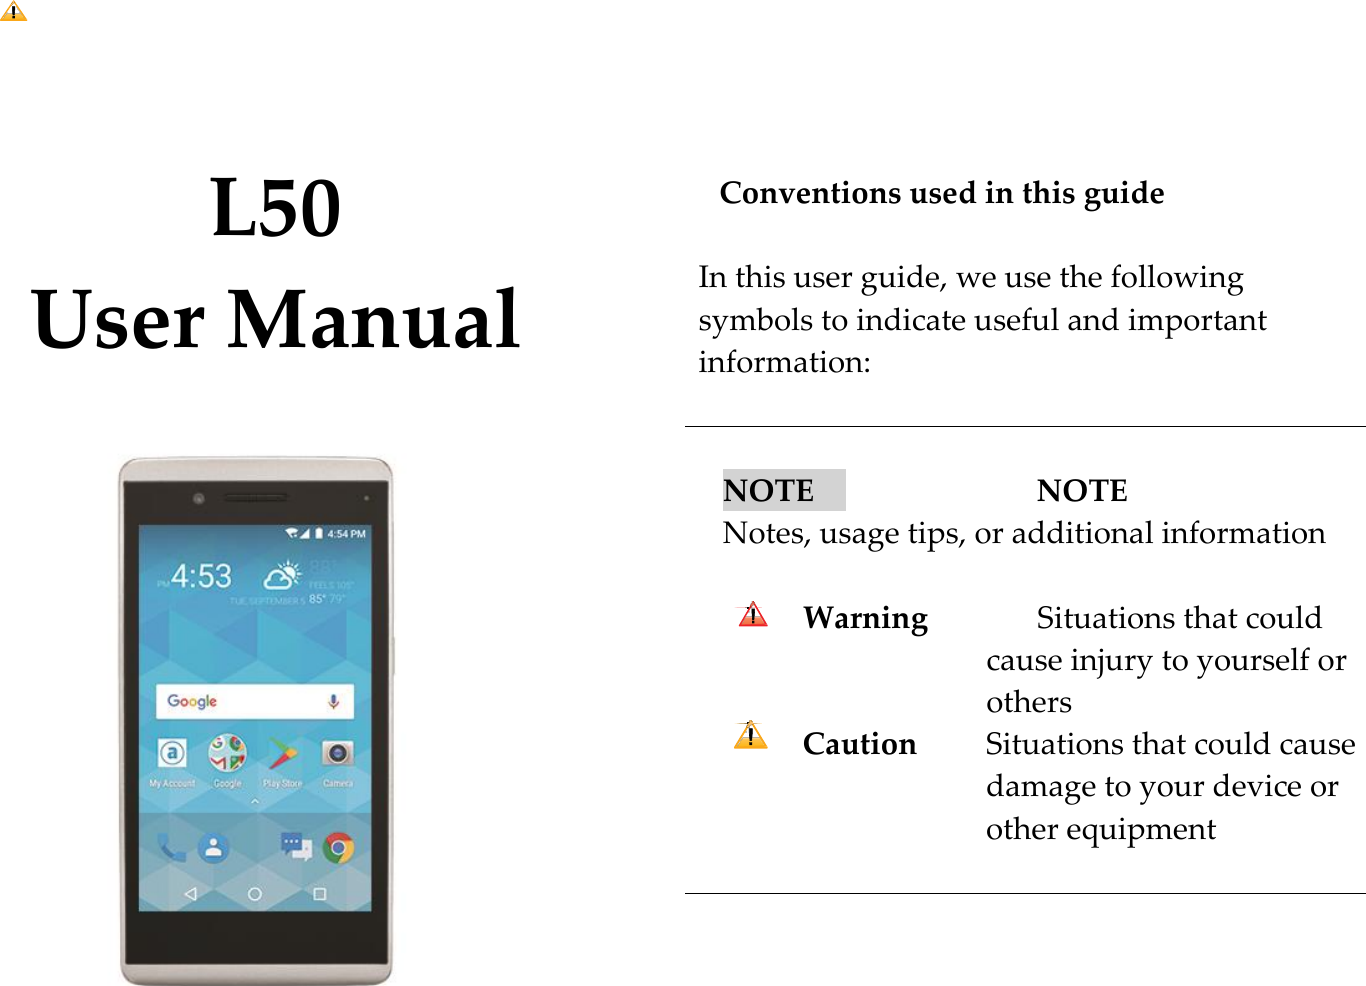    L50 User Manual             Conventions used in this guide  In this user guide, we use the following    symbols to indicate useful and important information:   NOTE      NOTE      Notes, usage tips, or additional information  Warning              Situations that could cause injury to yourself or others Caution        Situations that could cause damage to your device or other equipment      